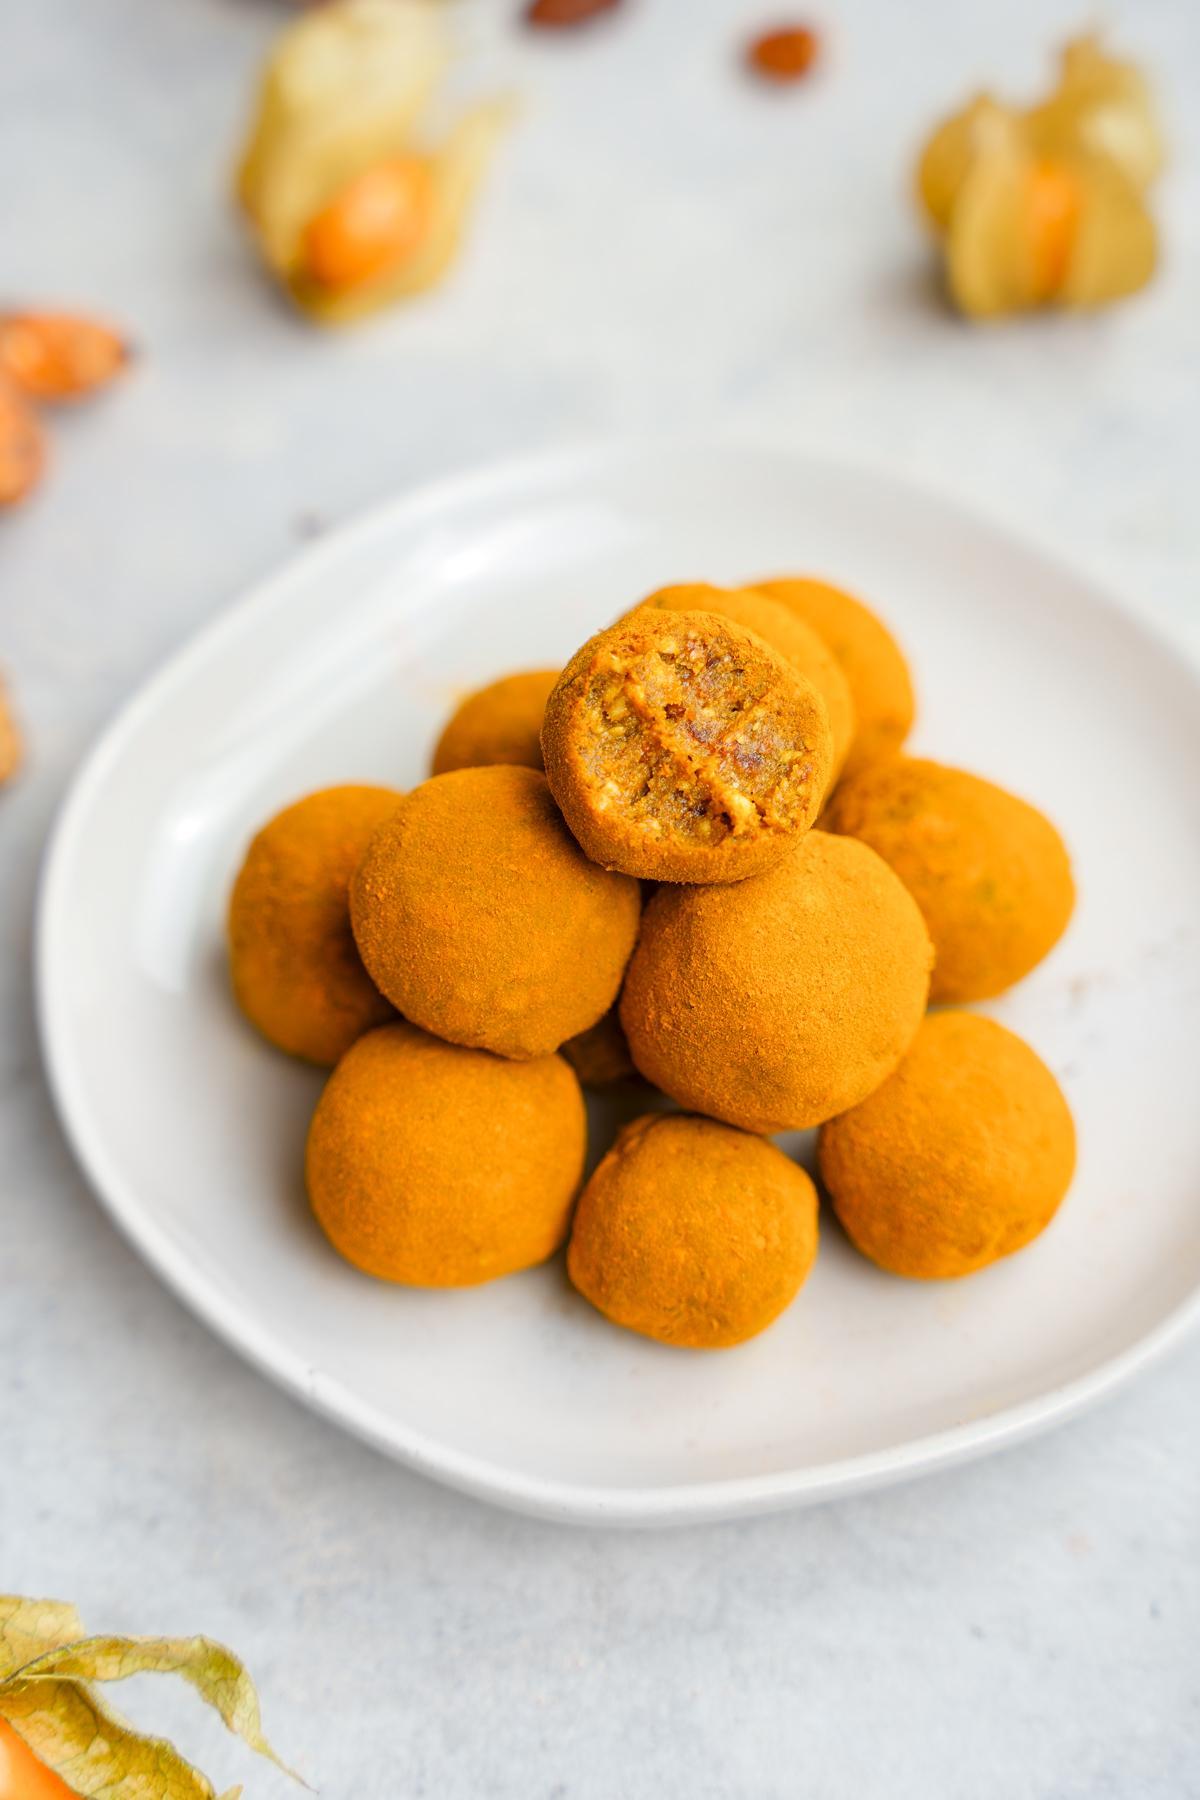 the turmeric bliss balls overtop with a bite taken out of one of them